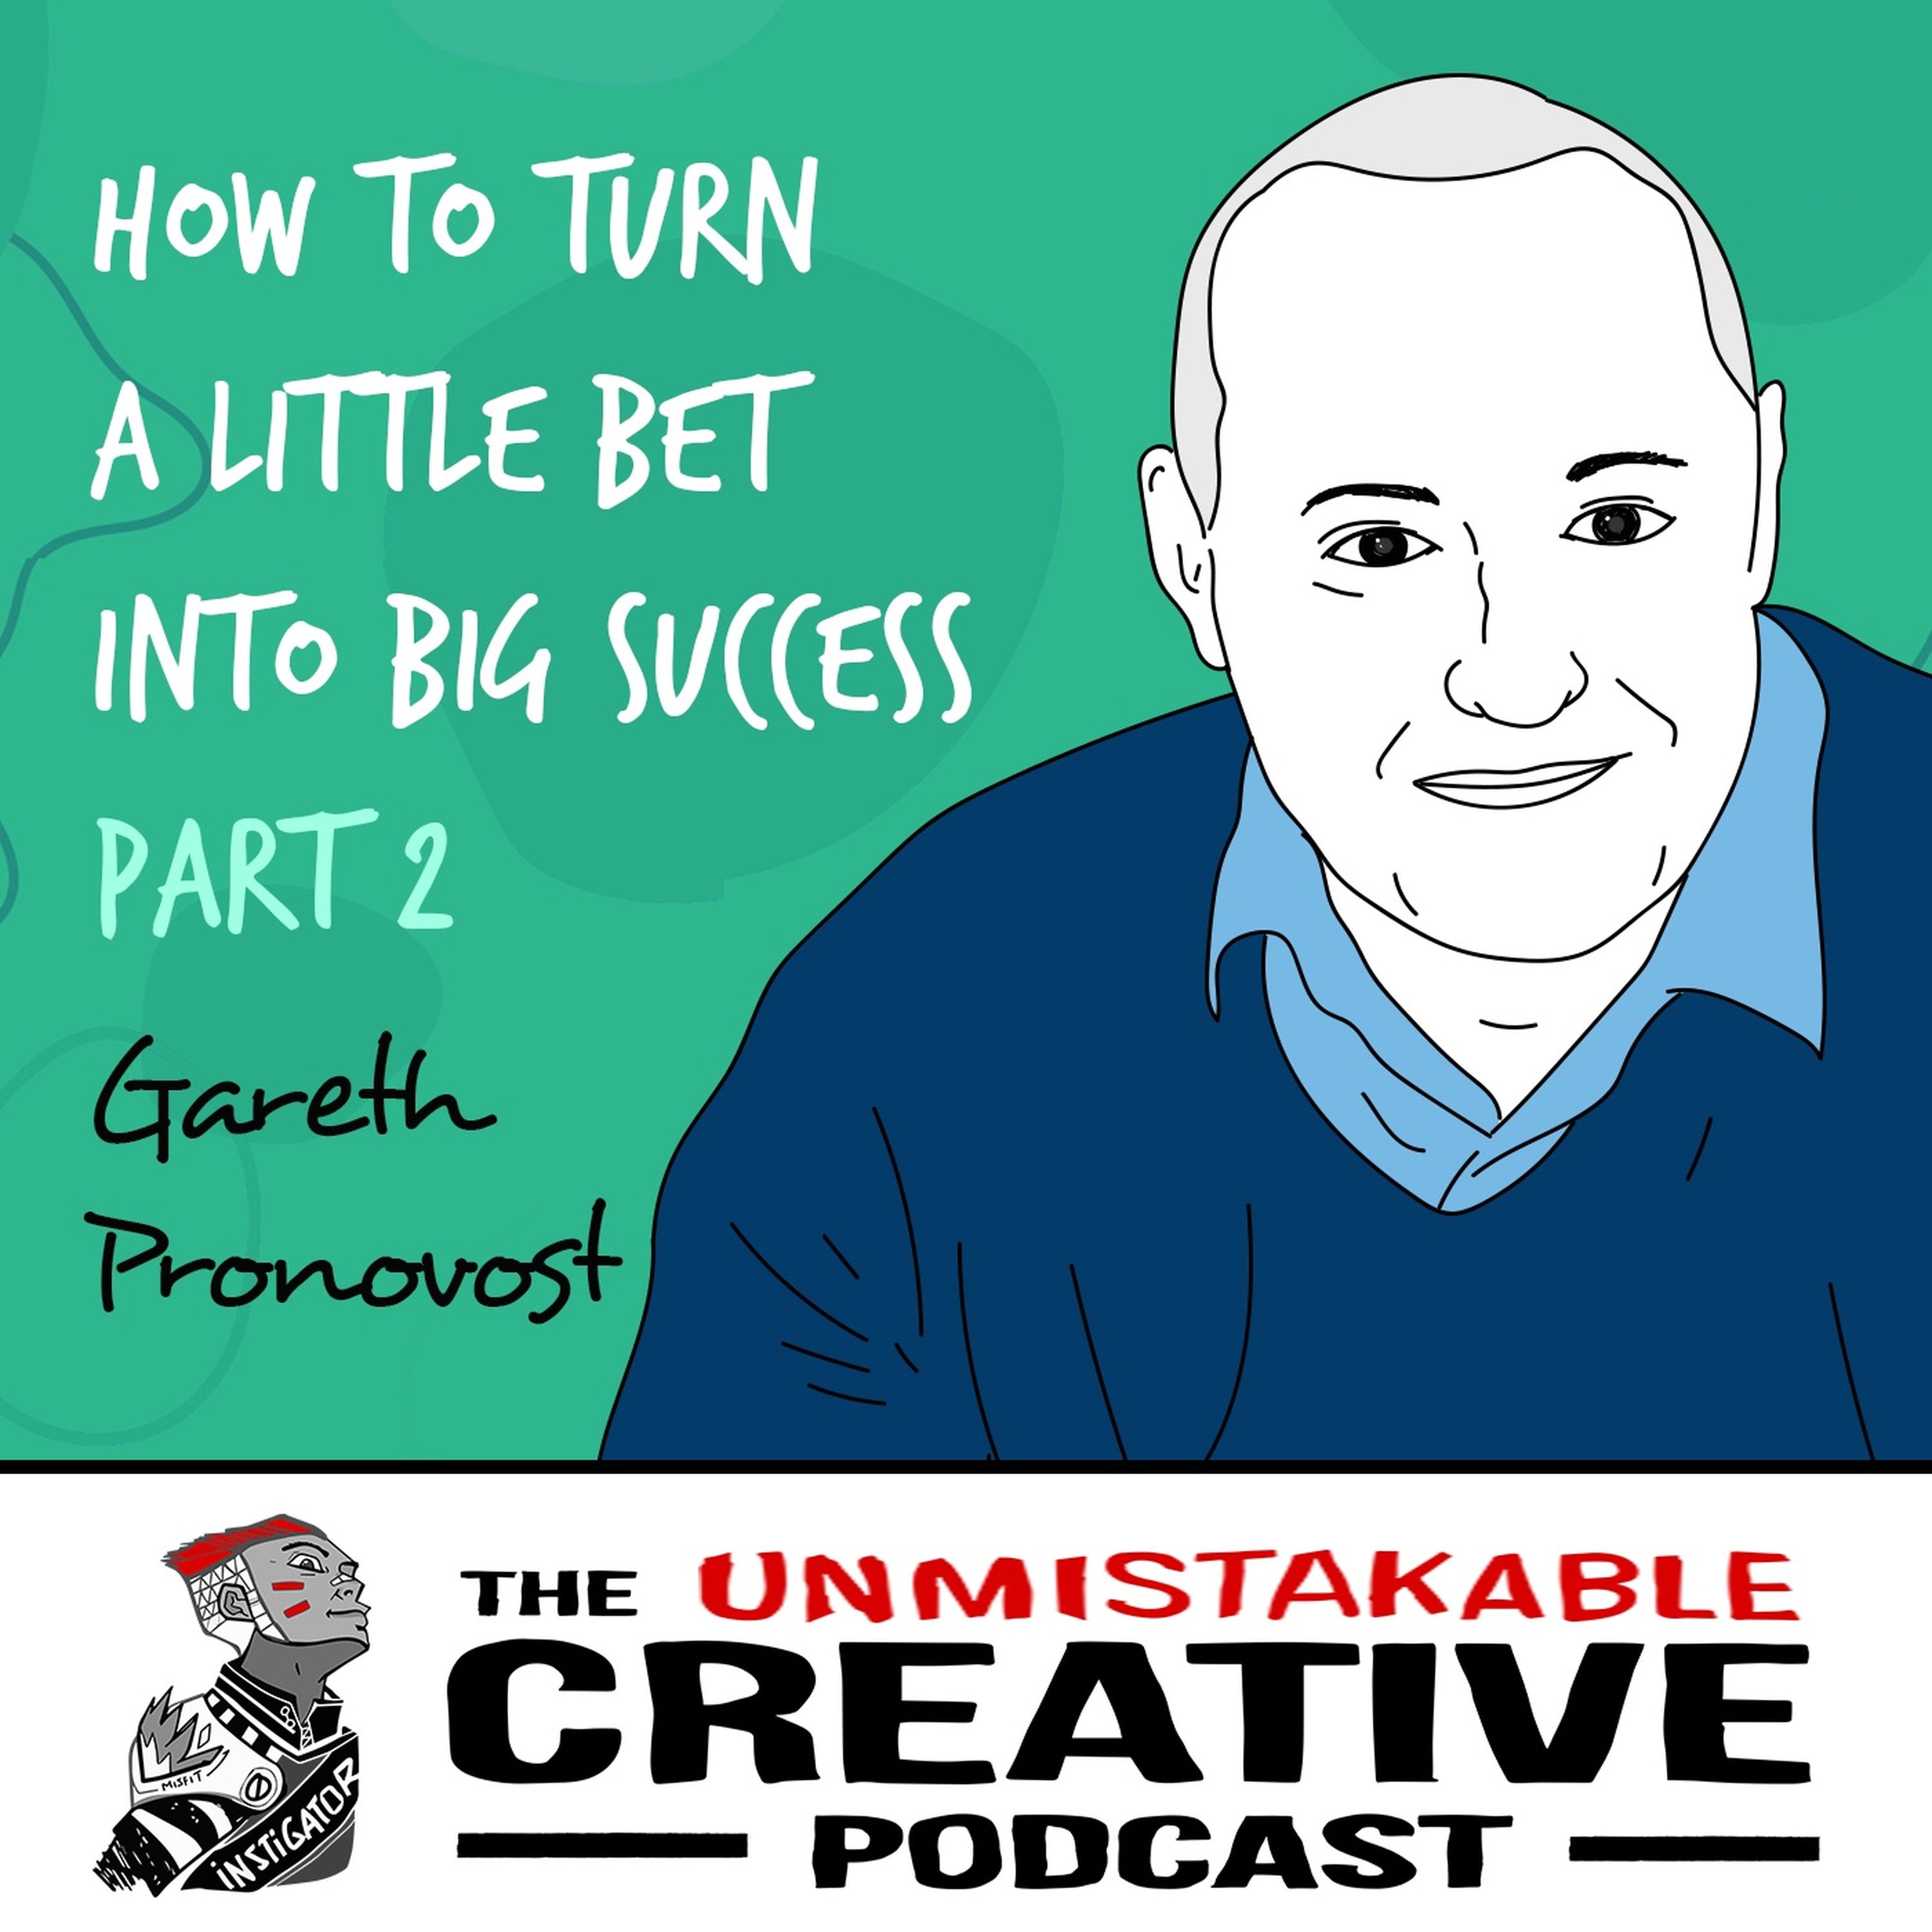 Gareth Pronovost | How to Turn a Little Bet into Big Success - Part 2